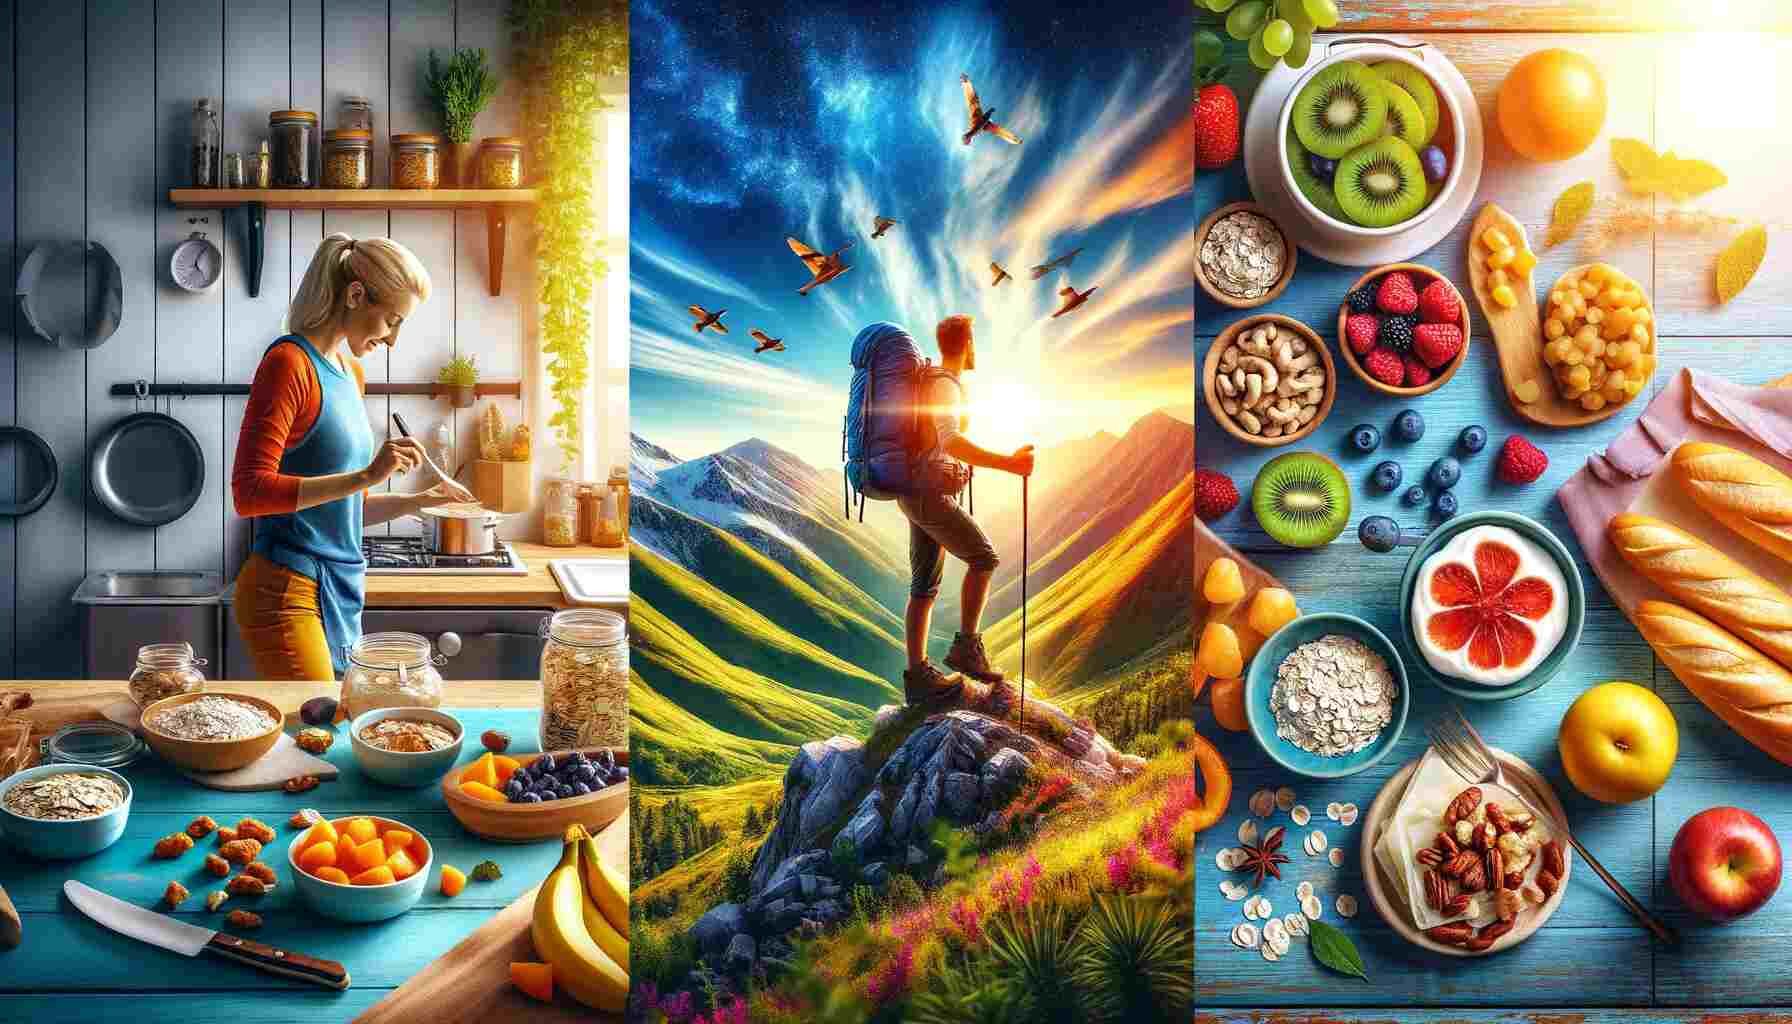 Here's the featured image depicting Fueling Your Hiking Adventures: What to Eat Before, During, and After a Hike. It showcases a montage of scenes related to hiking and nutrition: a hiker preparing a healthy breakfast, energetically trekking a mountain trail while eating a trail mix, and relaxing post-hike with a balanced meal. This vibrant image blends natural landscapes with food imagery, emphasizing the energy and vitality associated with proper nutrition for hiking.